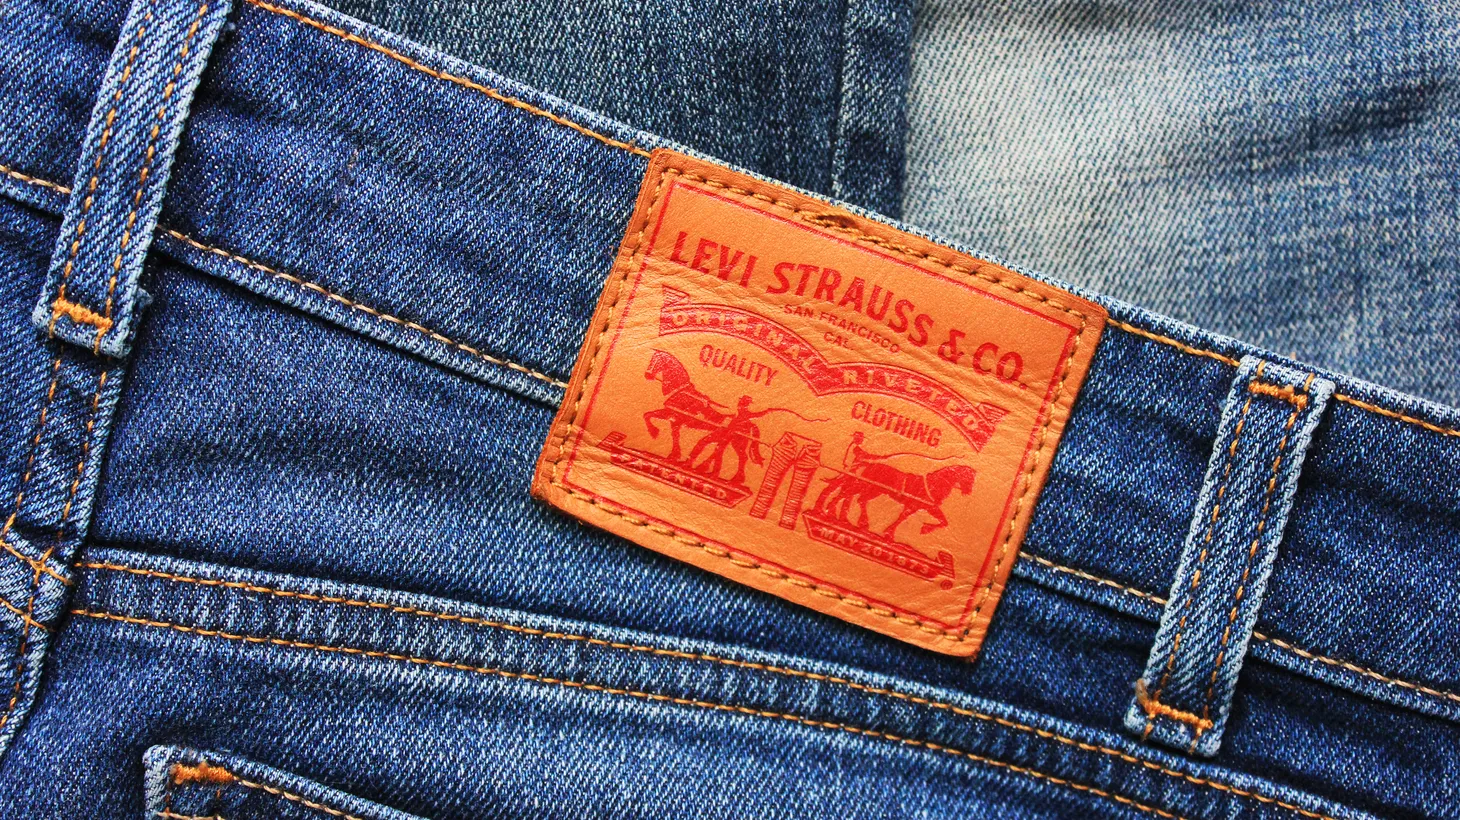 Pair of Levi’s jeans — with racist slogan — becomes history lesson